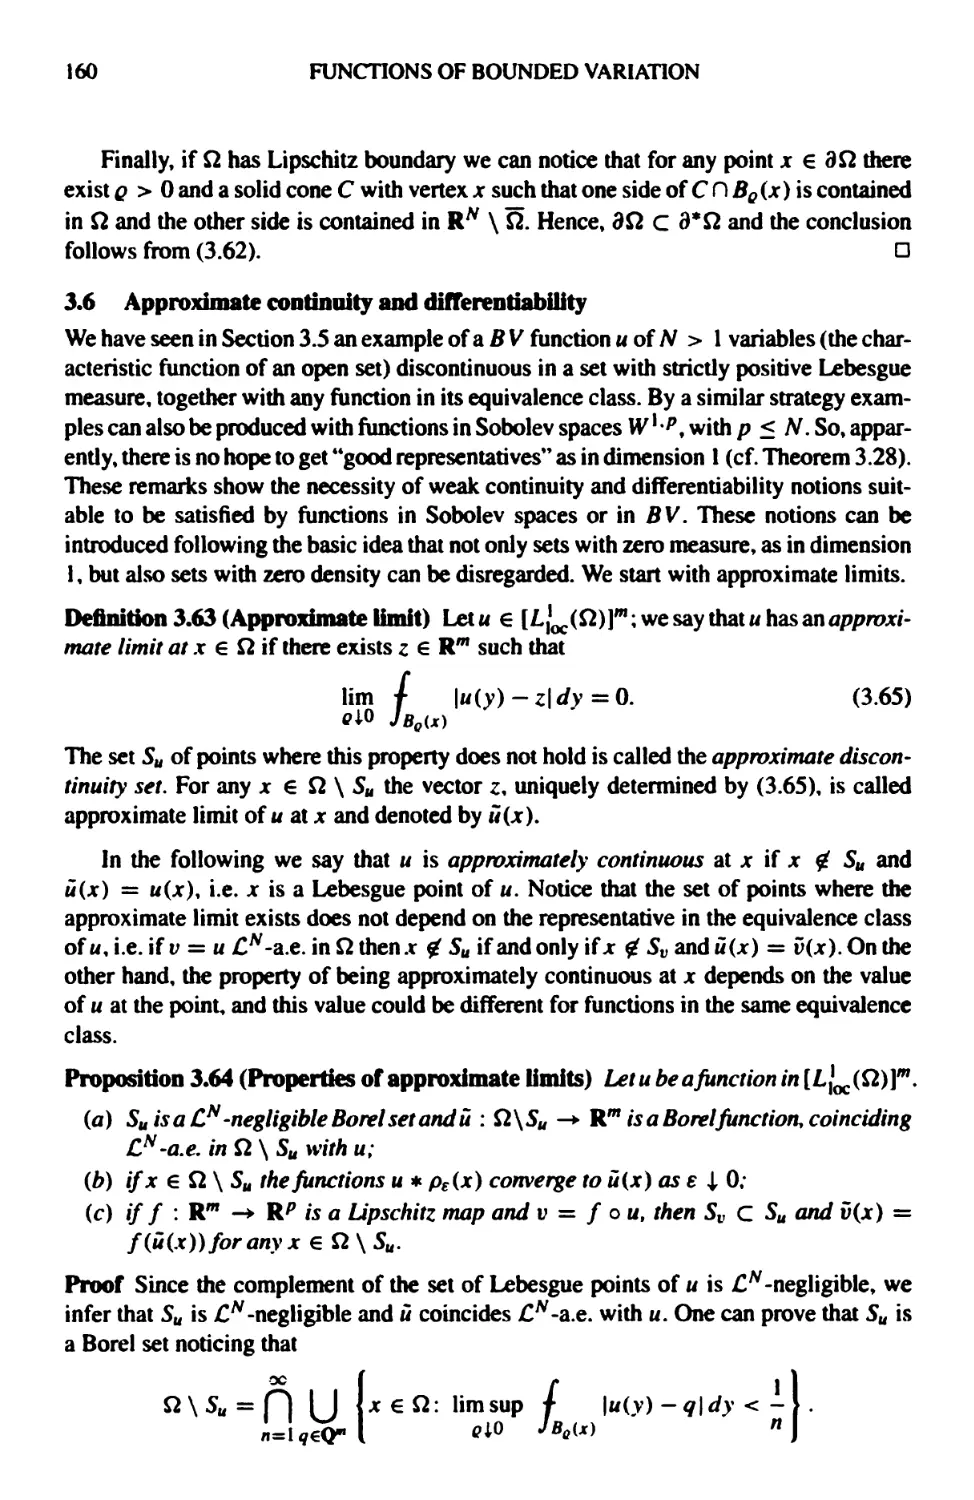 3.6 Approximate continuity and differentiability